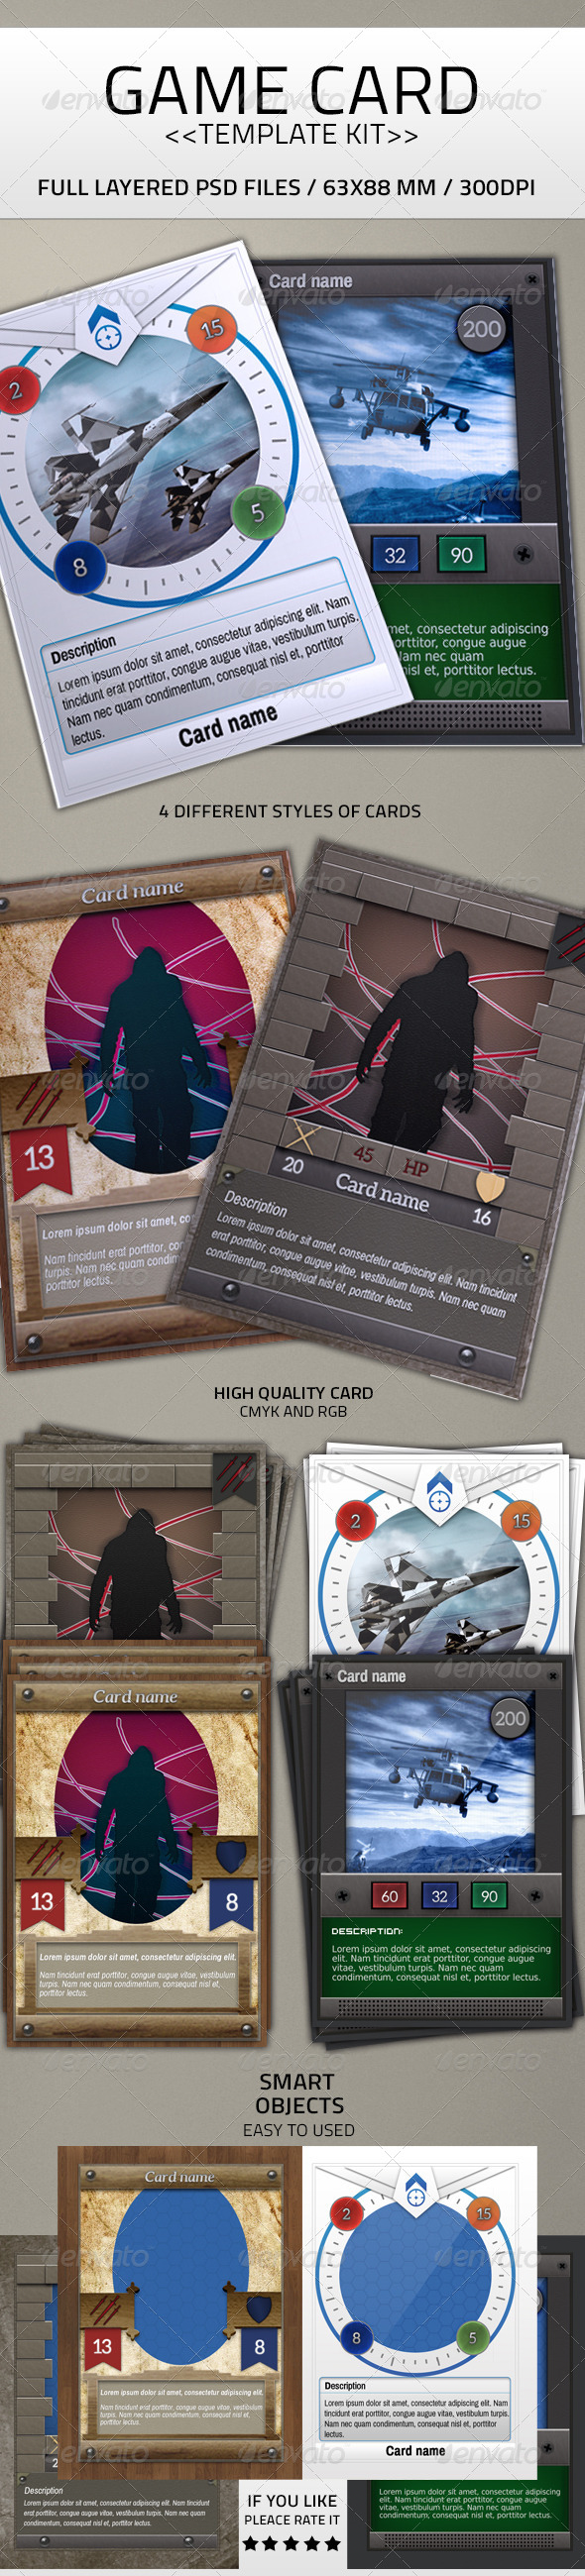 Card Game Kit Template